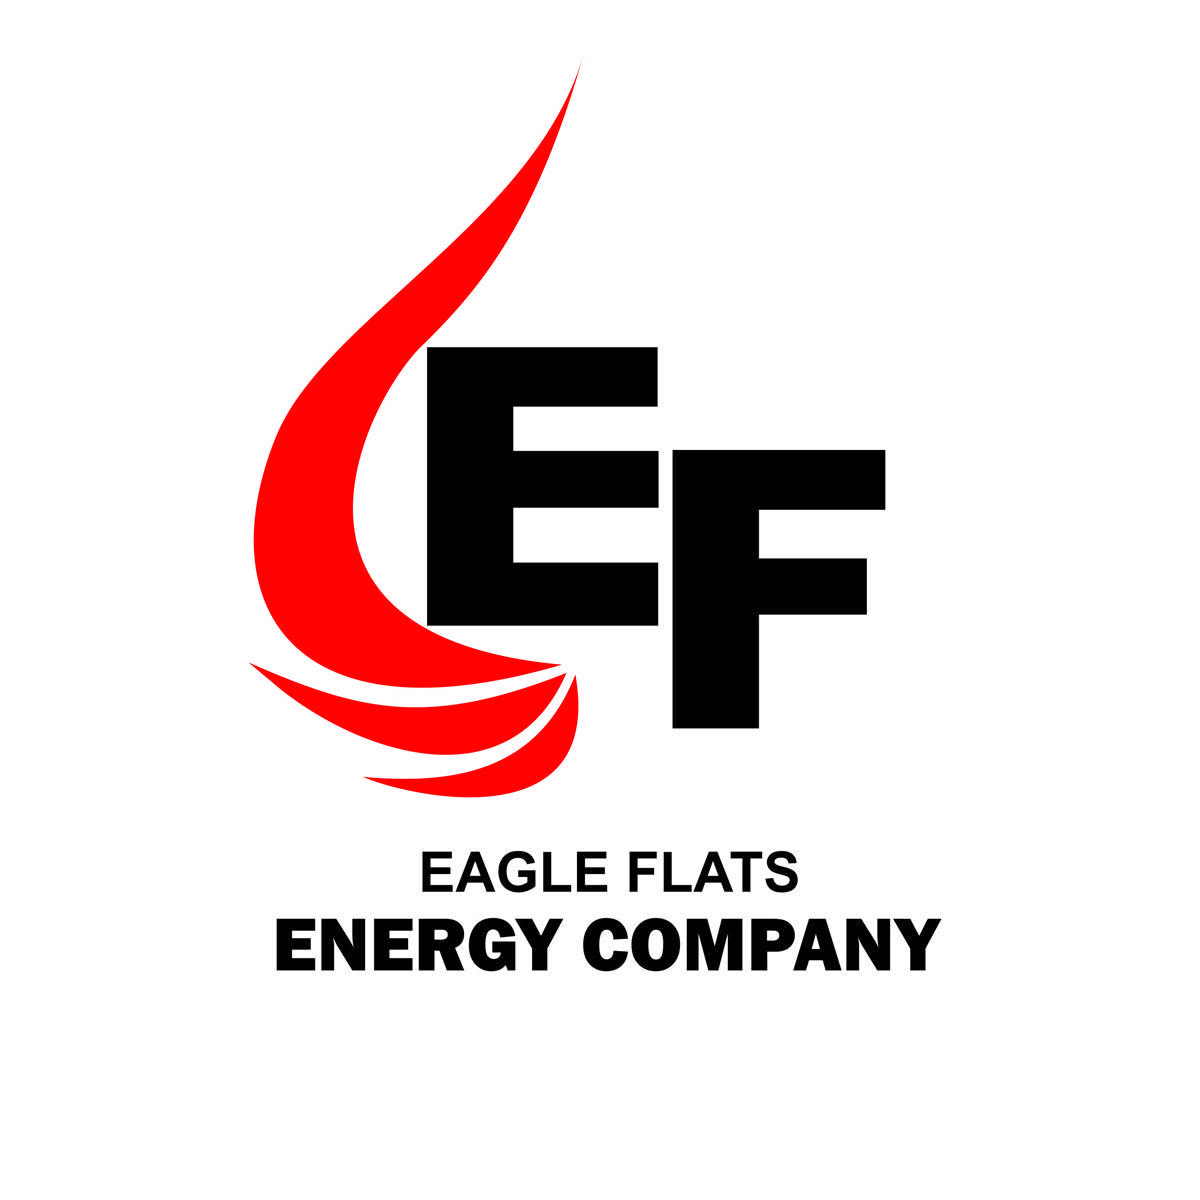 Oil and Gas Company Red Eagle Logo - Elegant, Playful, Oil And Gas Logo Design for Eagle Flats Energy